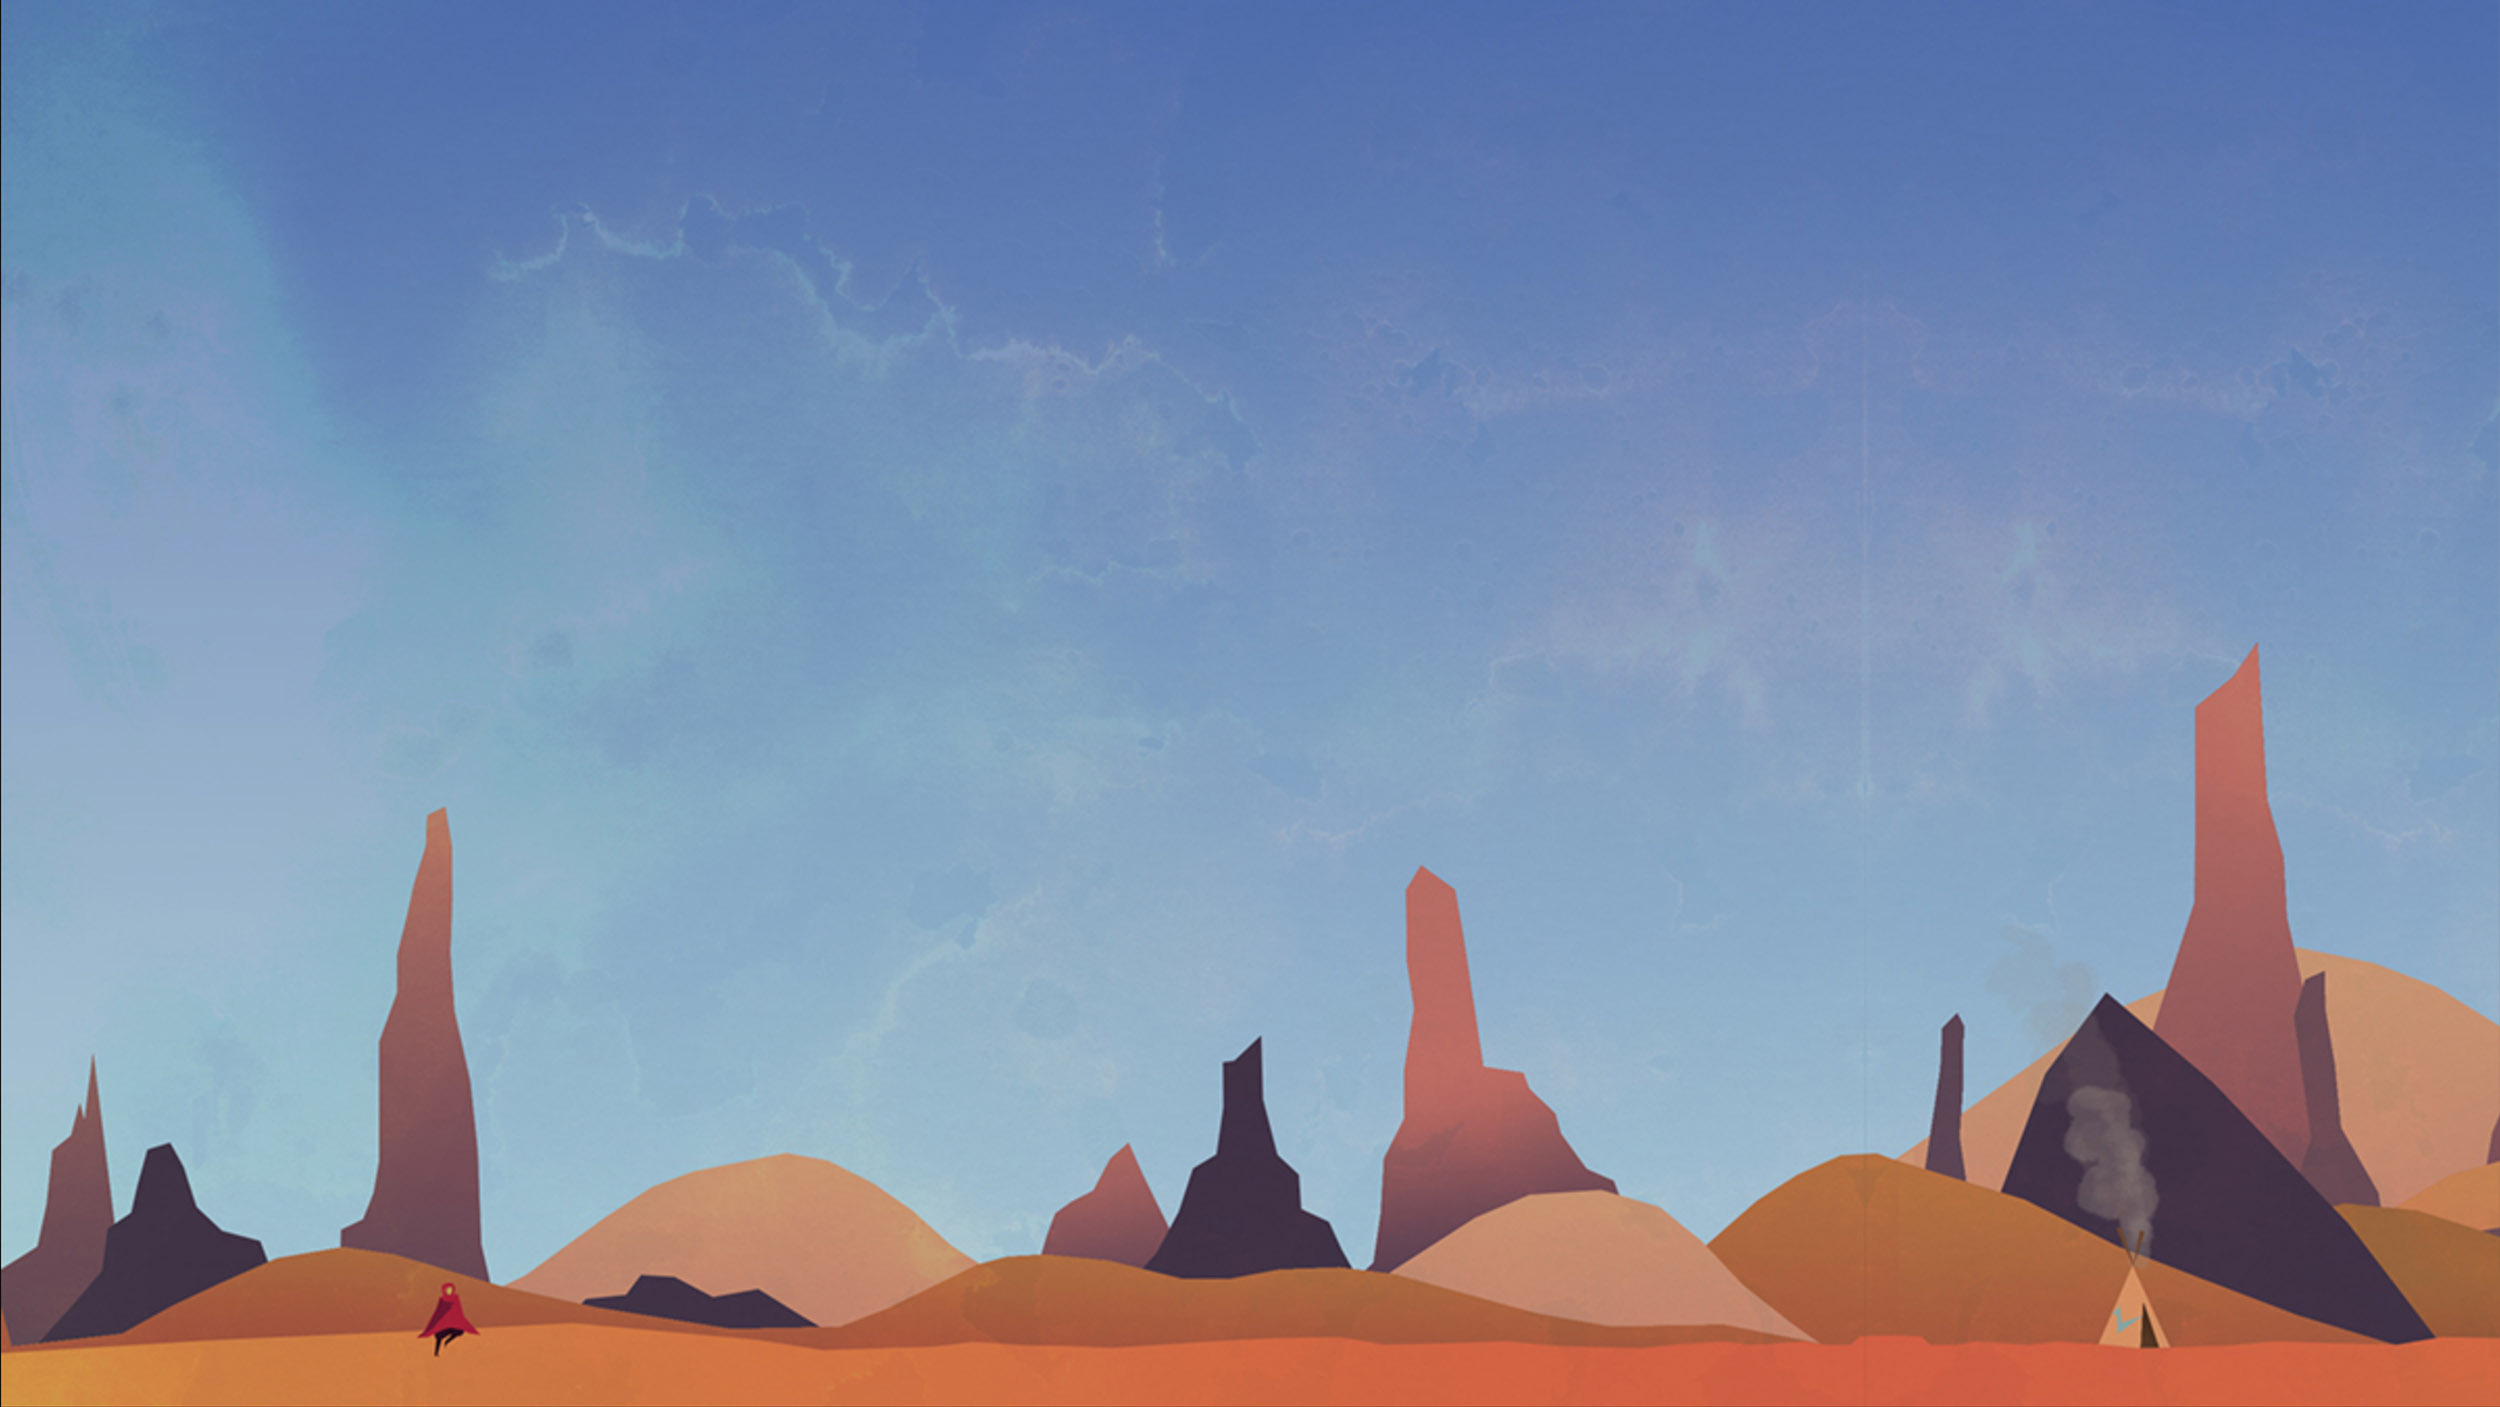 View full size version of a digital illustration of desert mountains under a blue sky